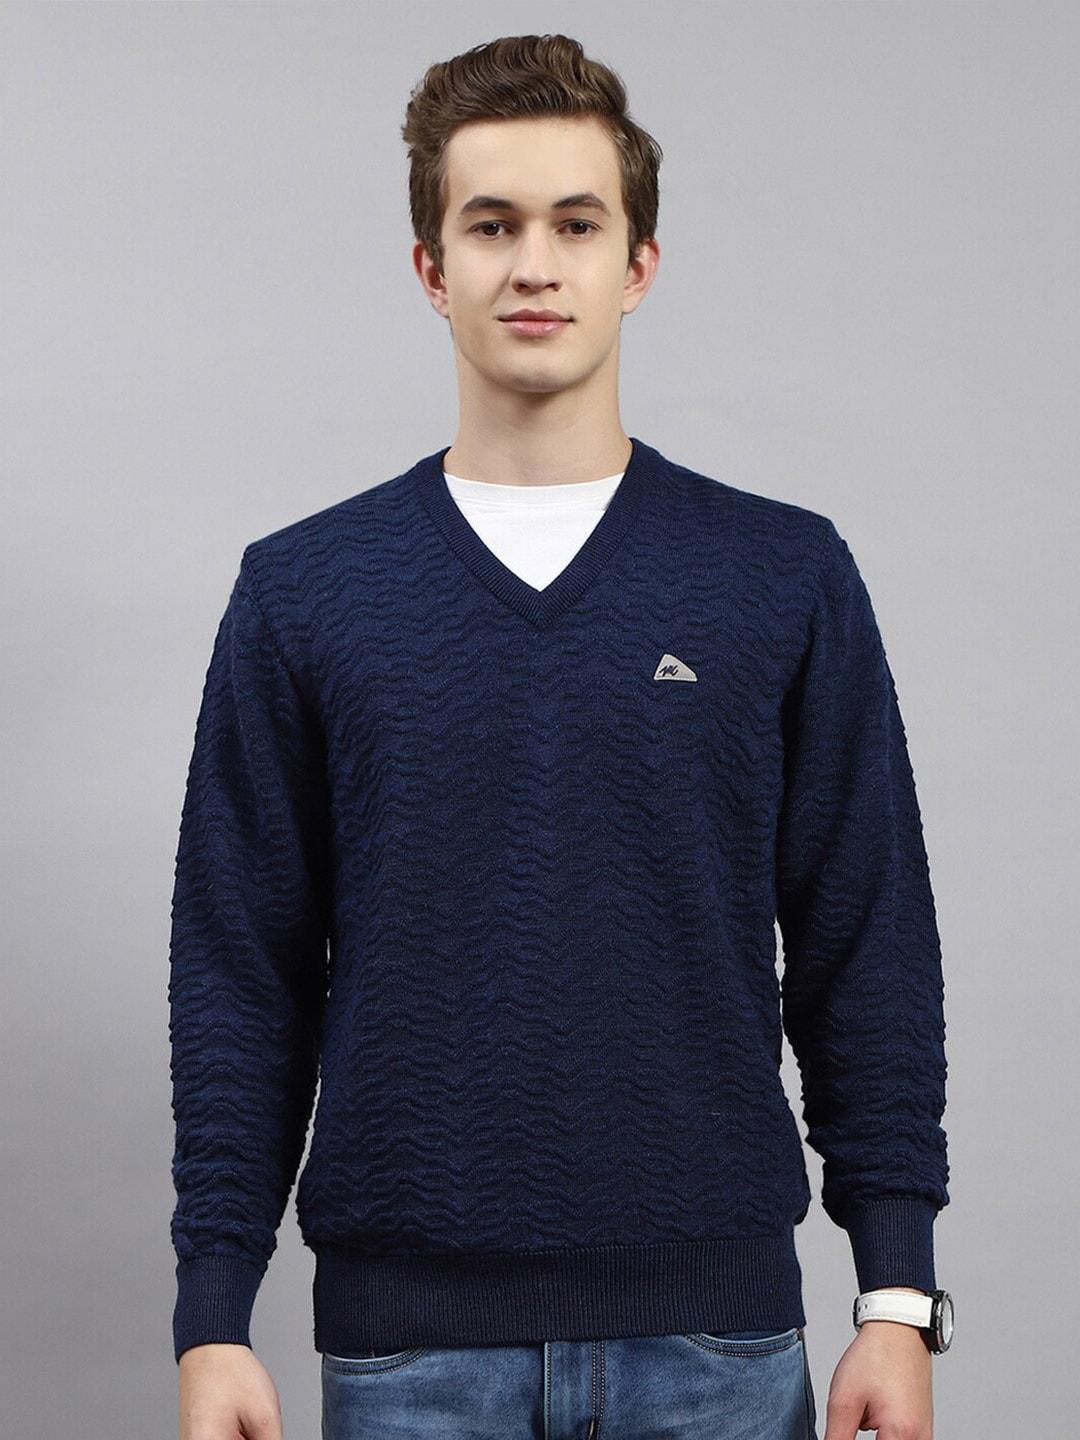 monte-carlo-cable-knit-full-sleeve-woollen-pullover-sweater